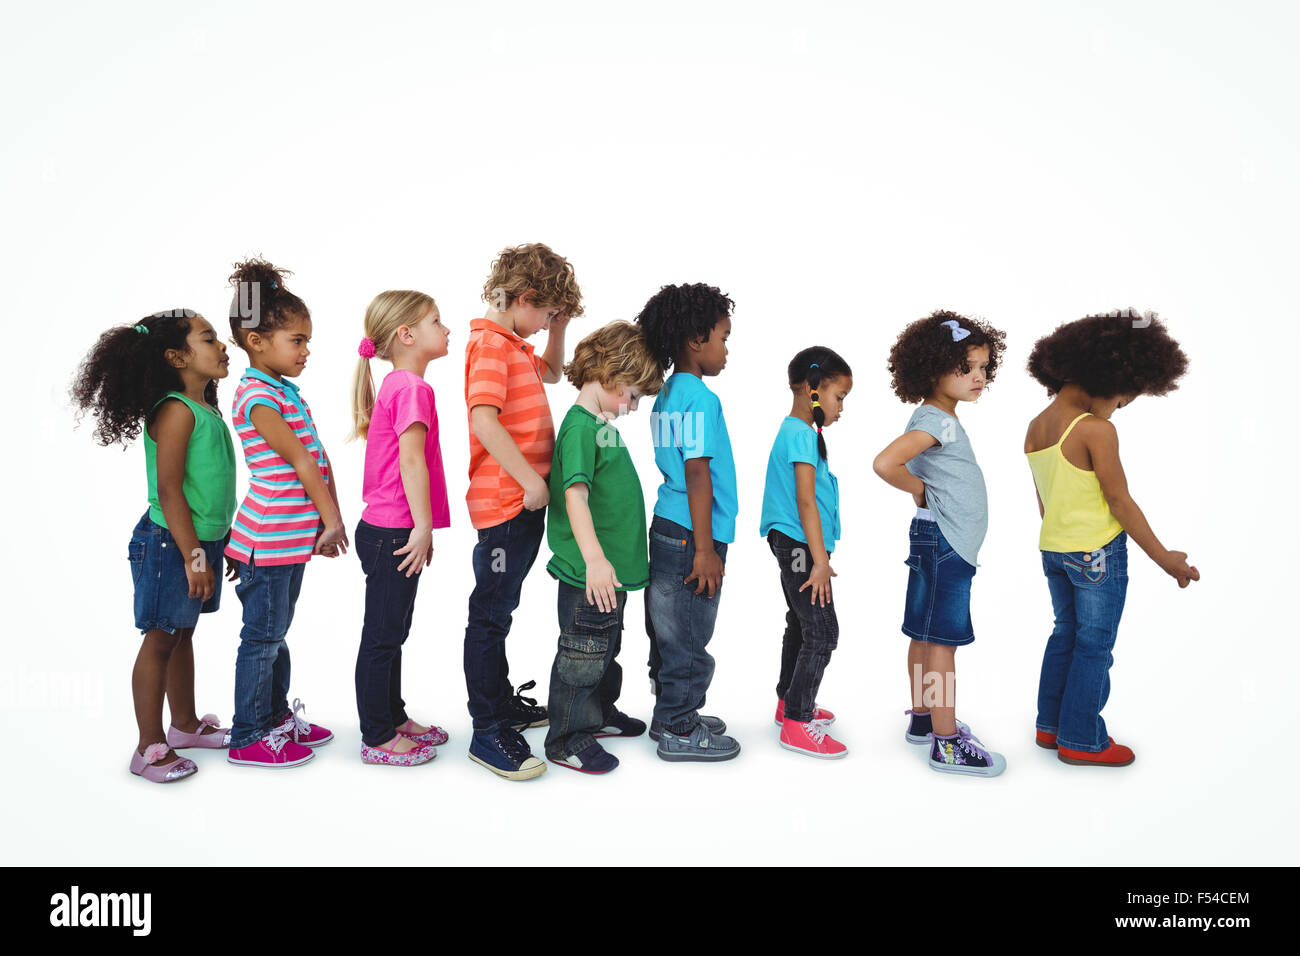 Group of kids standing in a line Stock Photo